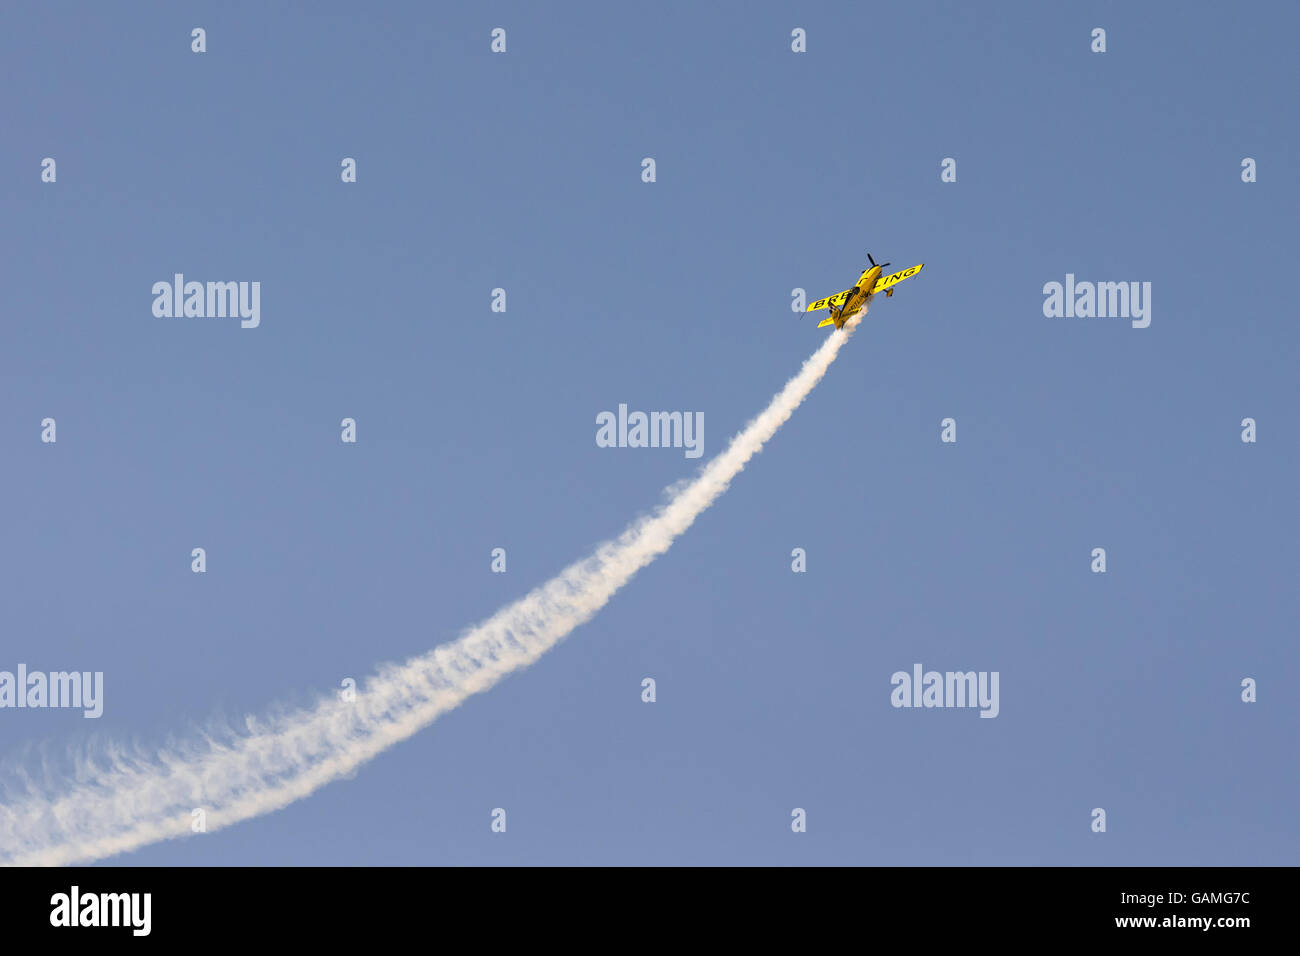 Athens, Greece 13 September 2015. Aviator plane doing tricks up in the sky at the Athens flying week air show. Stock Photo